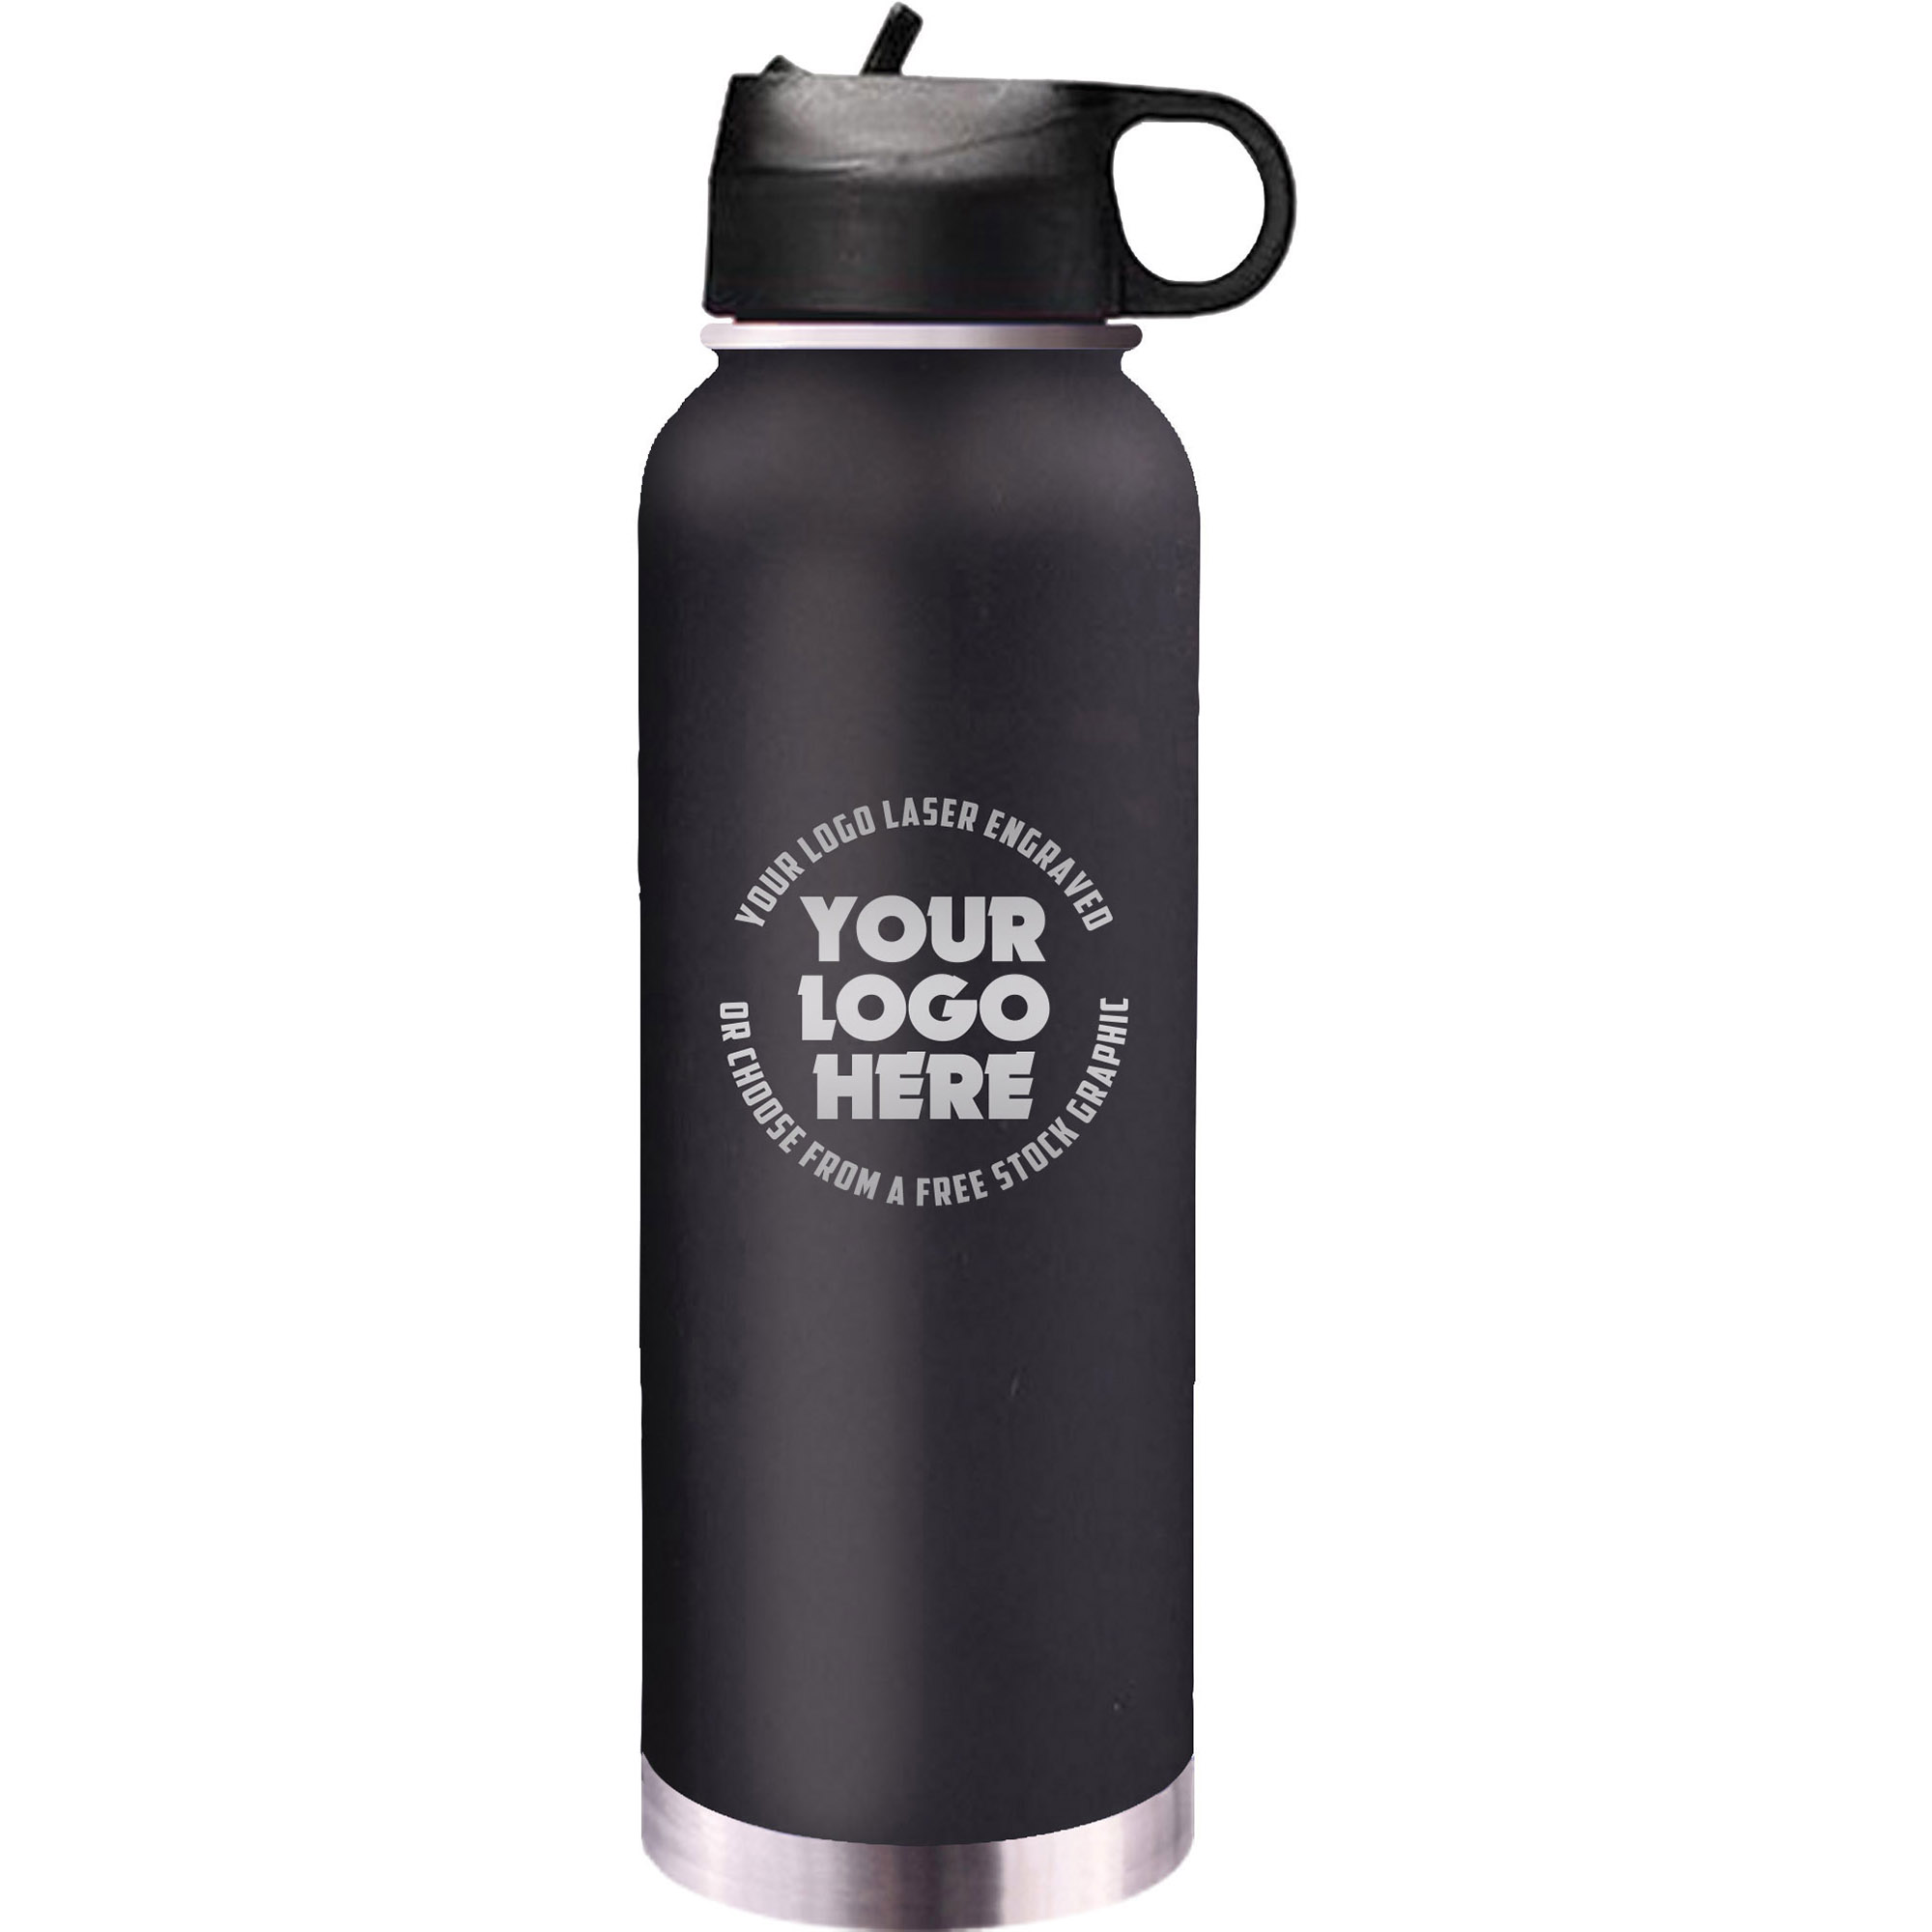 Tahoe© 32 oz. Insulated Water Bottle - Black